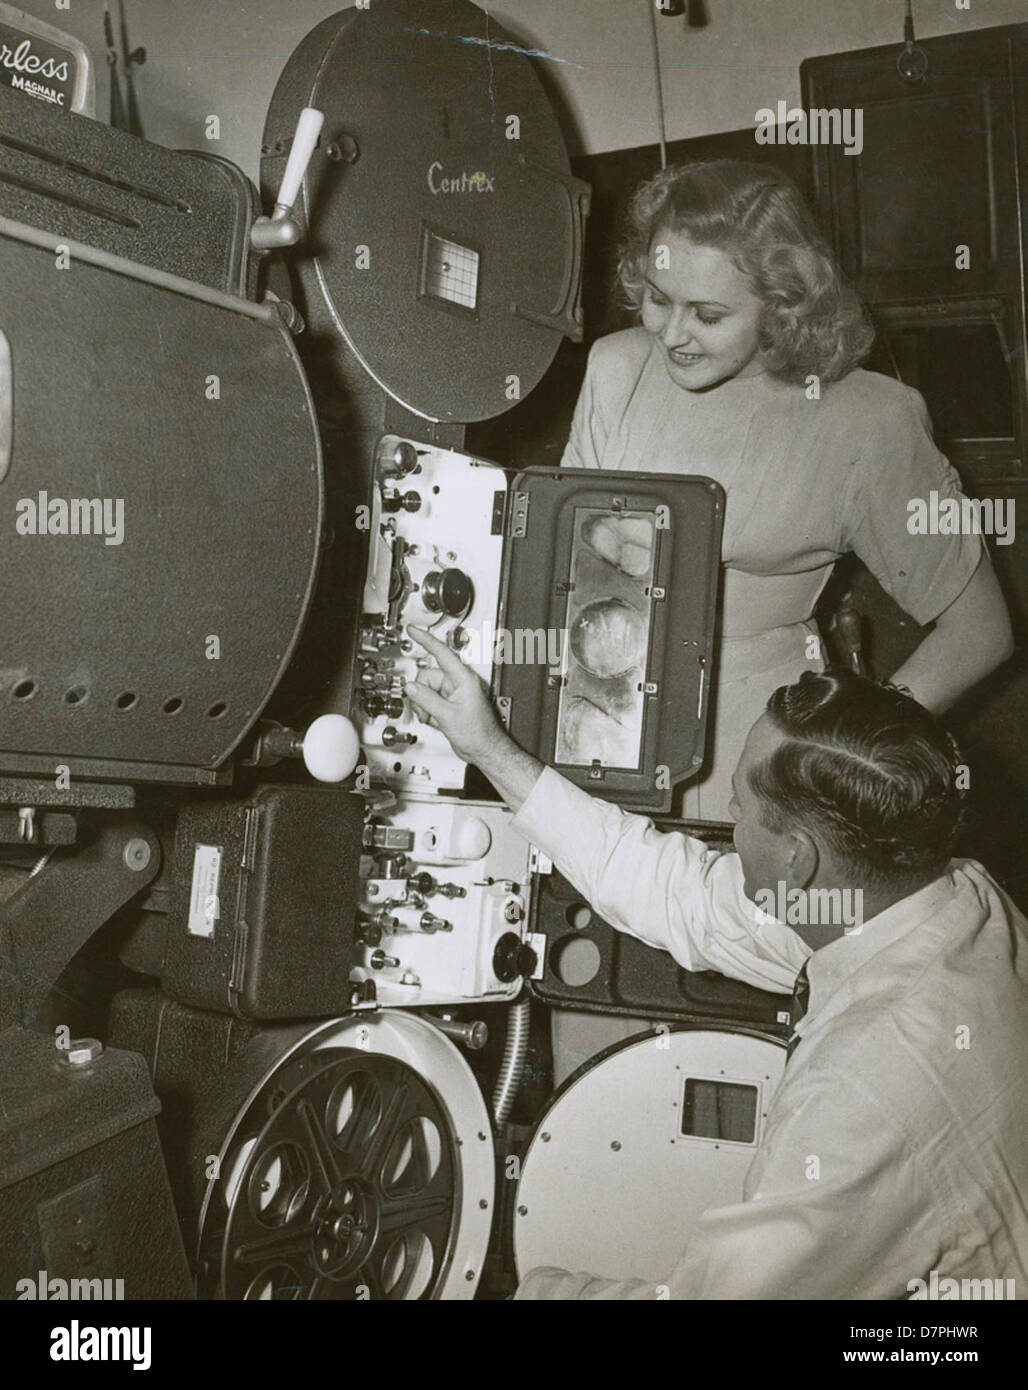 R.J. (Bob) Lucas and unidentified woman looking at a Centrex projector, 1940 - 1949 Stock Photo